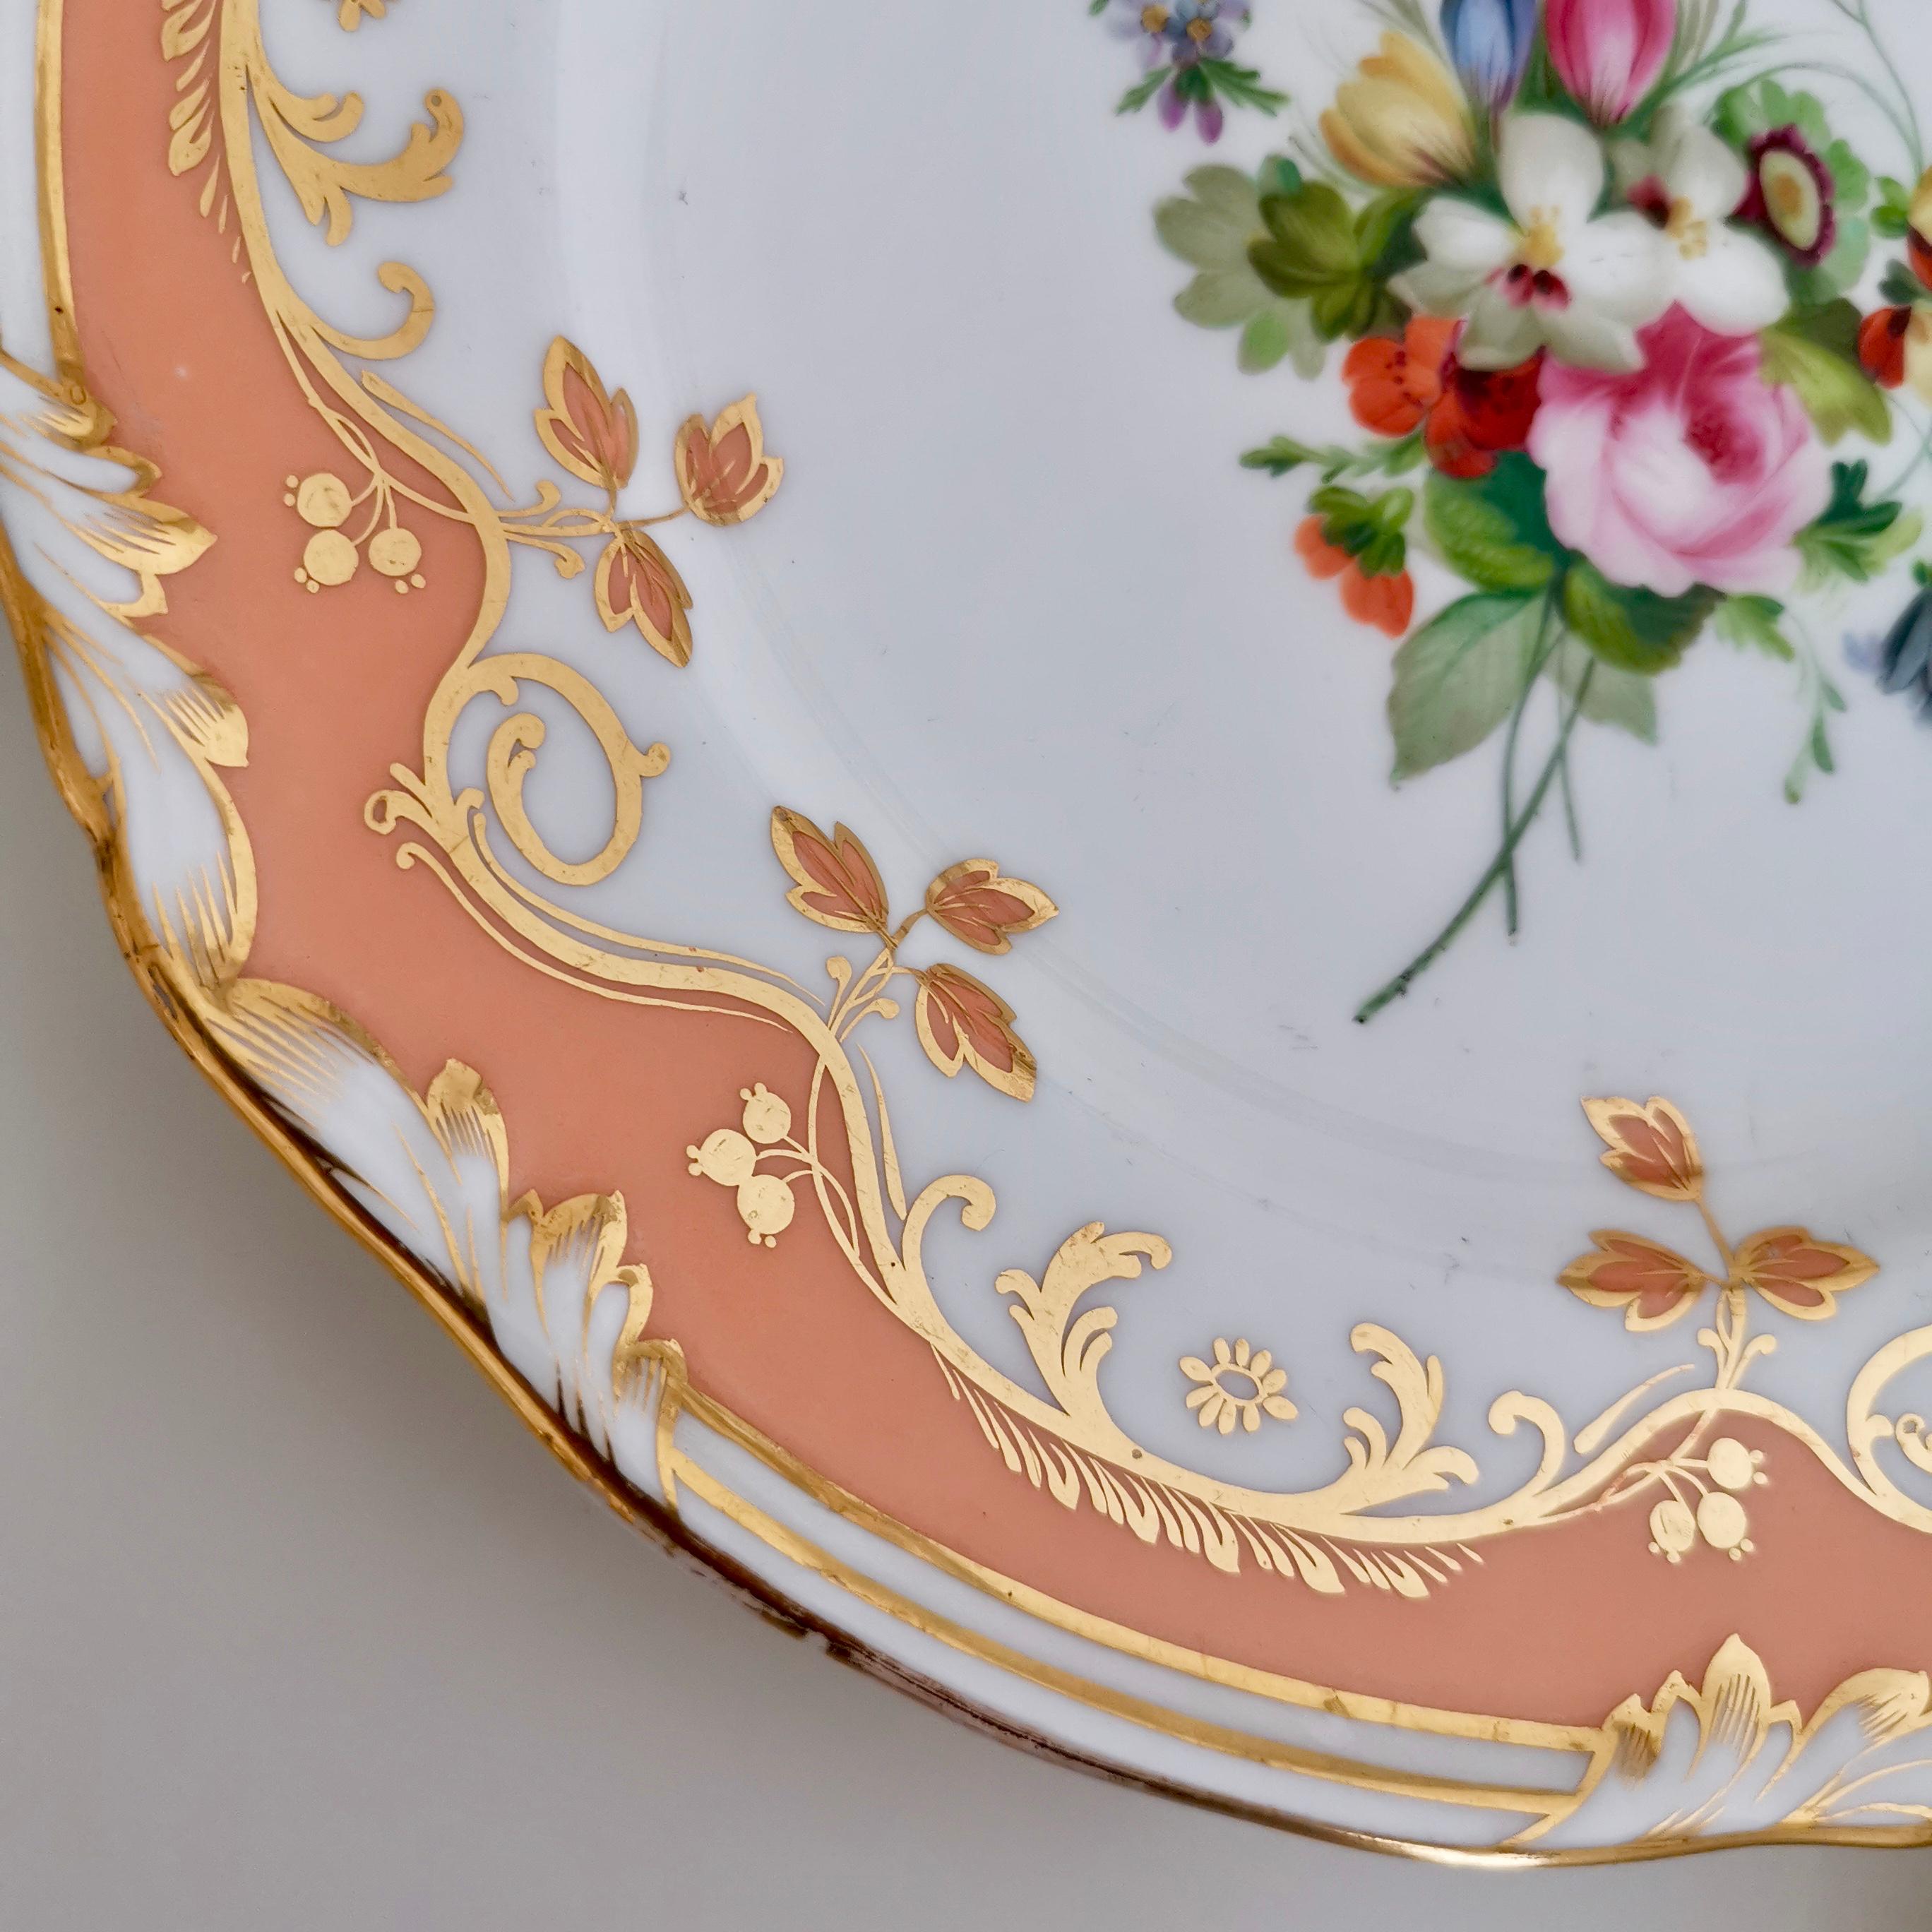 Mid-19th Century Coalport Porcelain Plate, Peach Ground and Flowers by Thomas Dixon